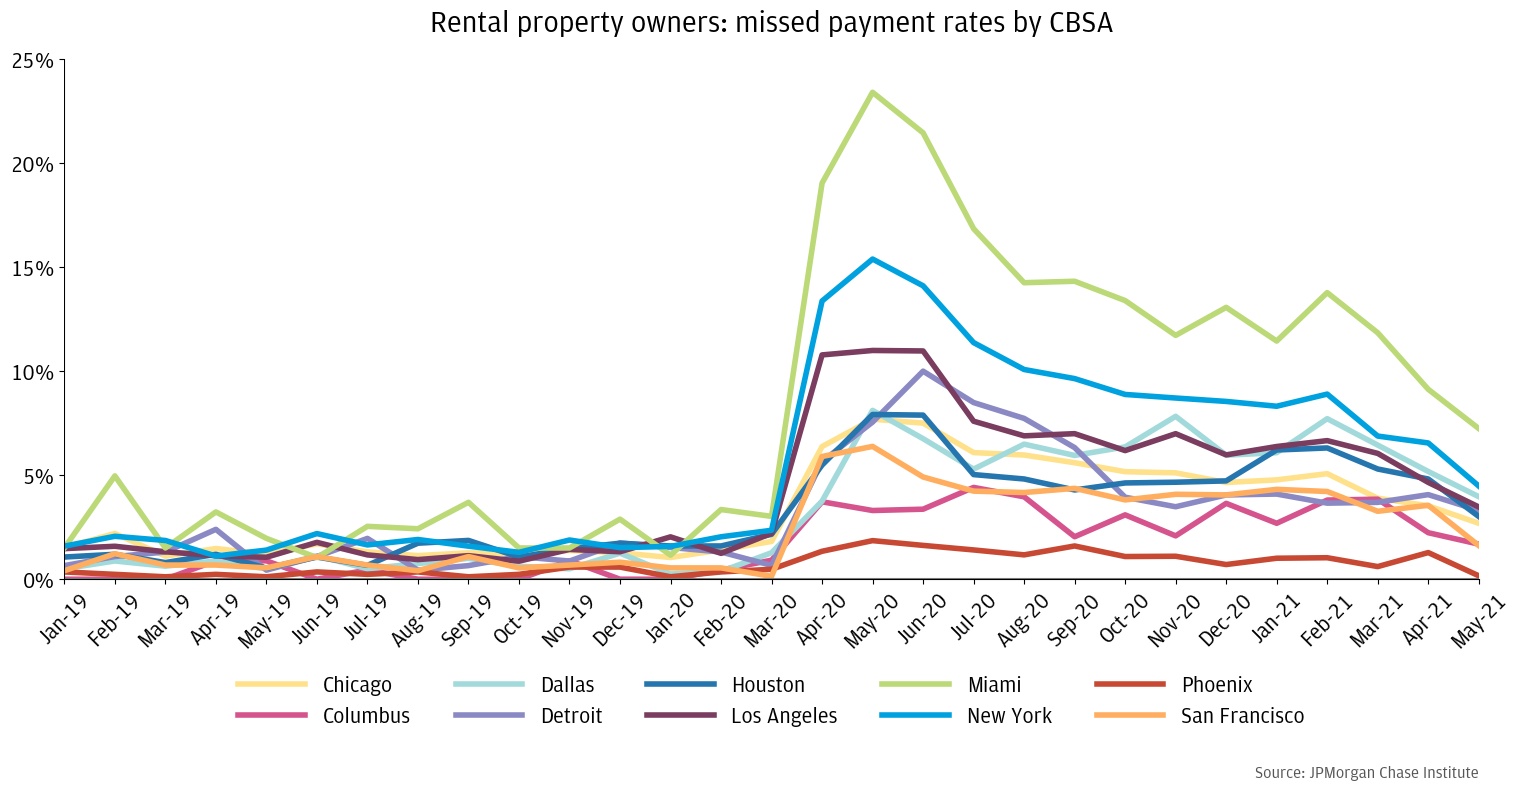 : Rental property owners: missed payment rates by CBSA